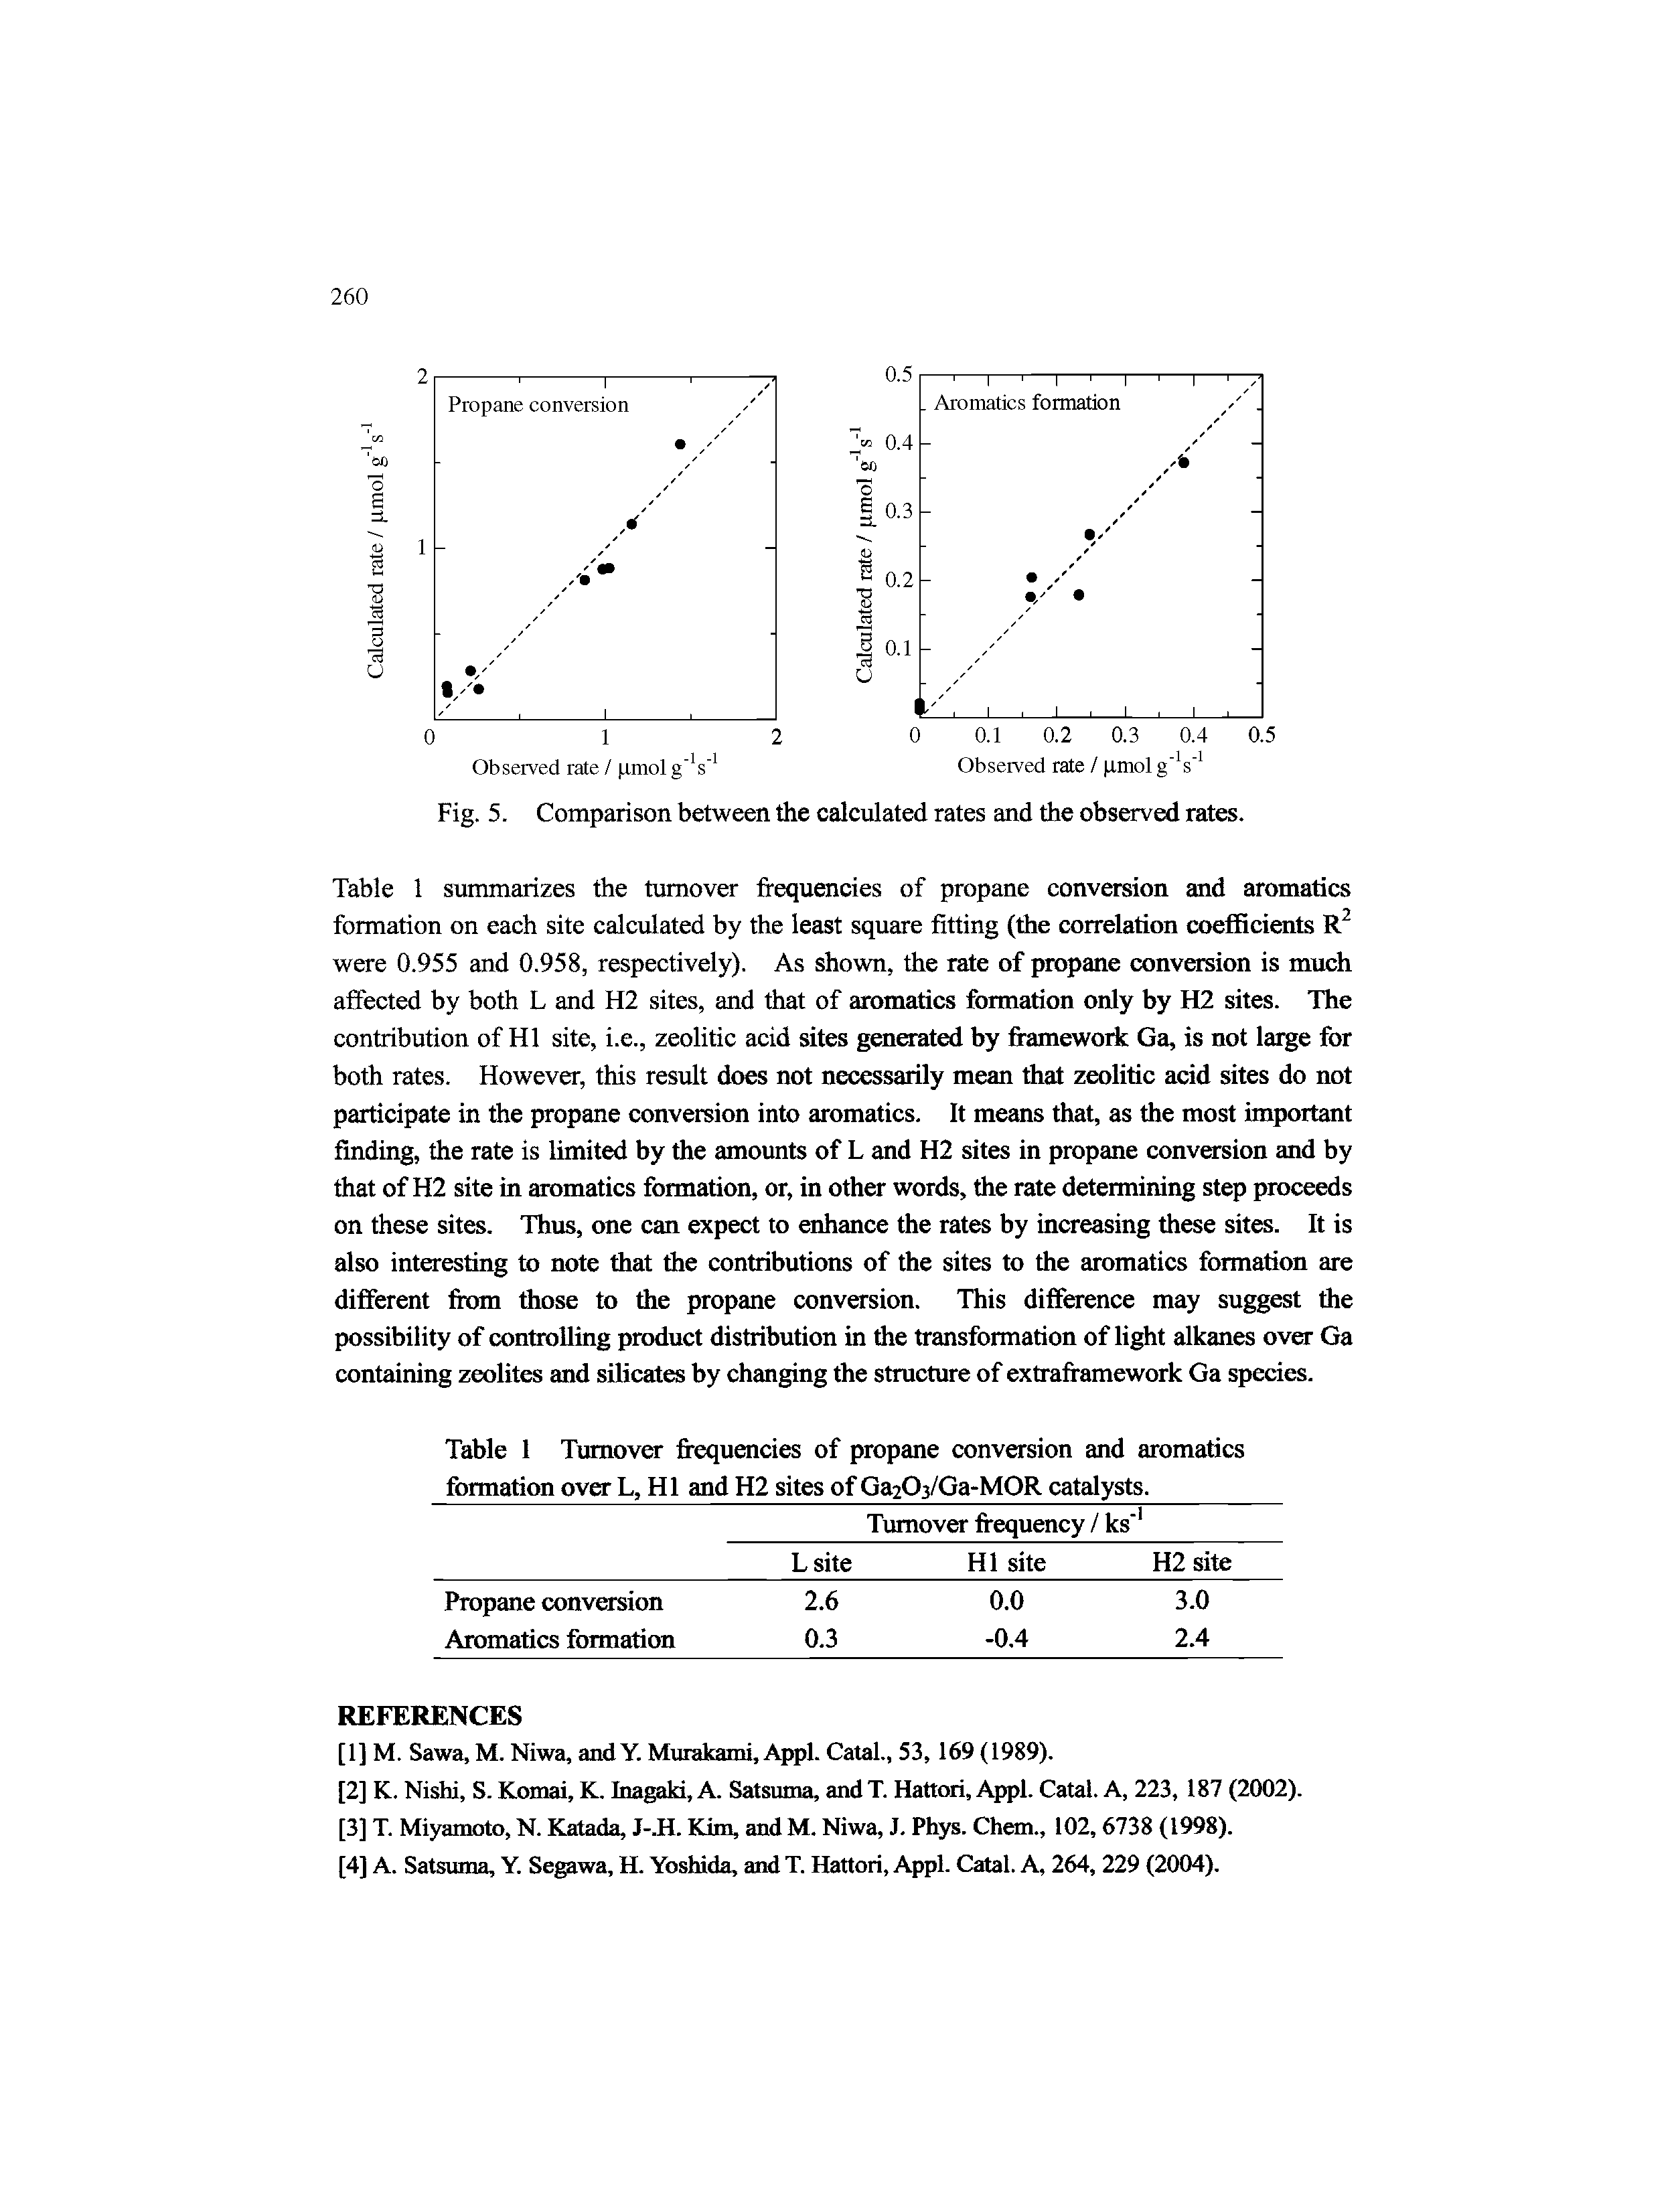 Table 1 Turnover frequencies of propane conversion and aromatics formation over L, HI and H2 sites of Ga203/Ga-M0R catalysts.